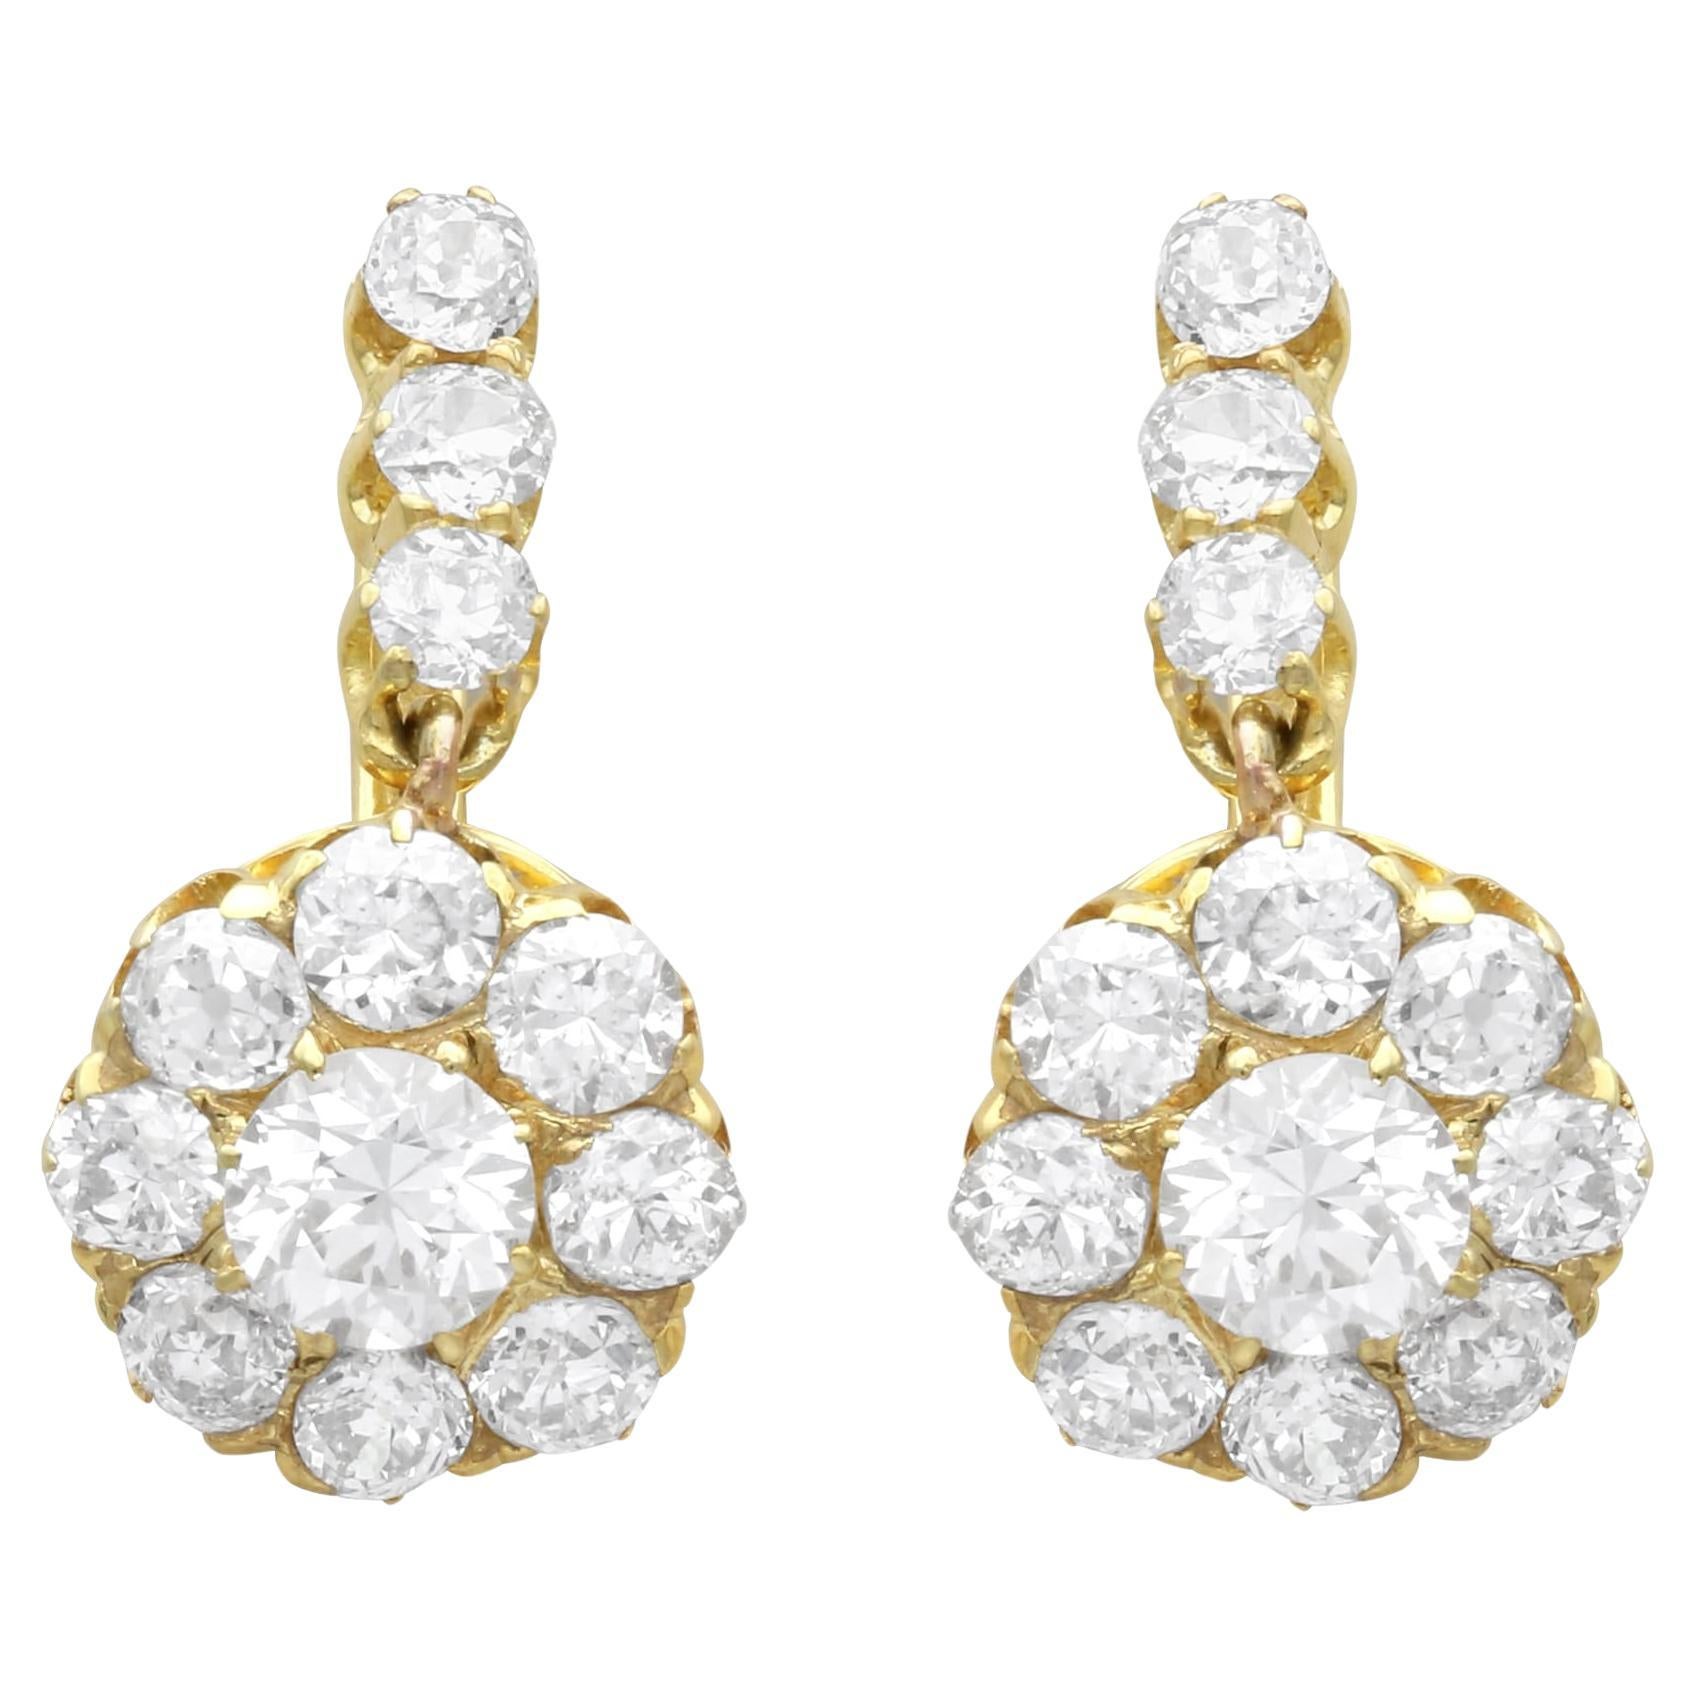 1920s Dutch 2.35ct Diamond and 14k Yellow Gold Cluster Earrings